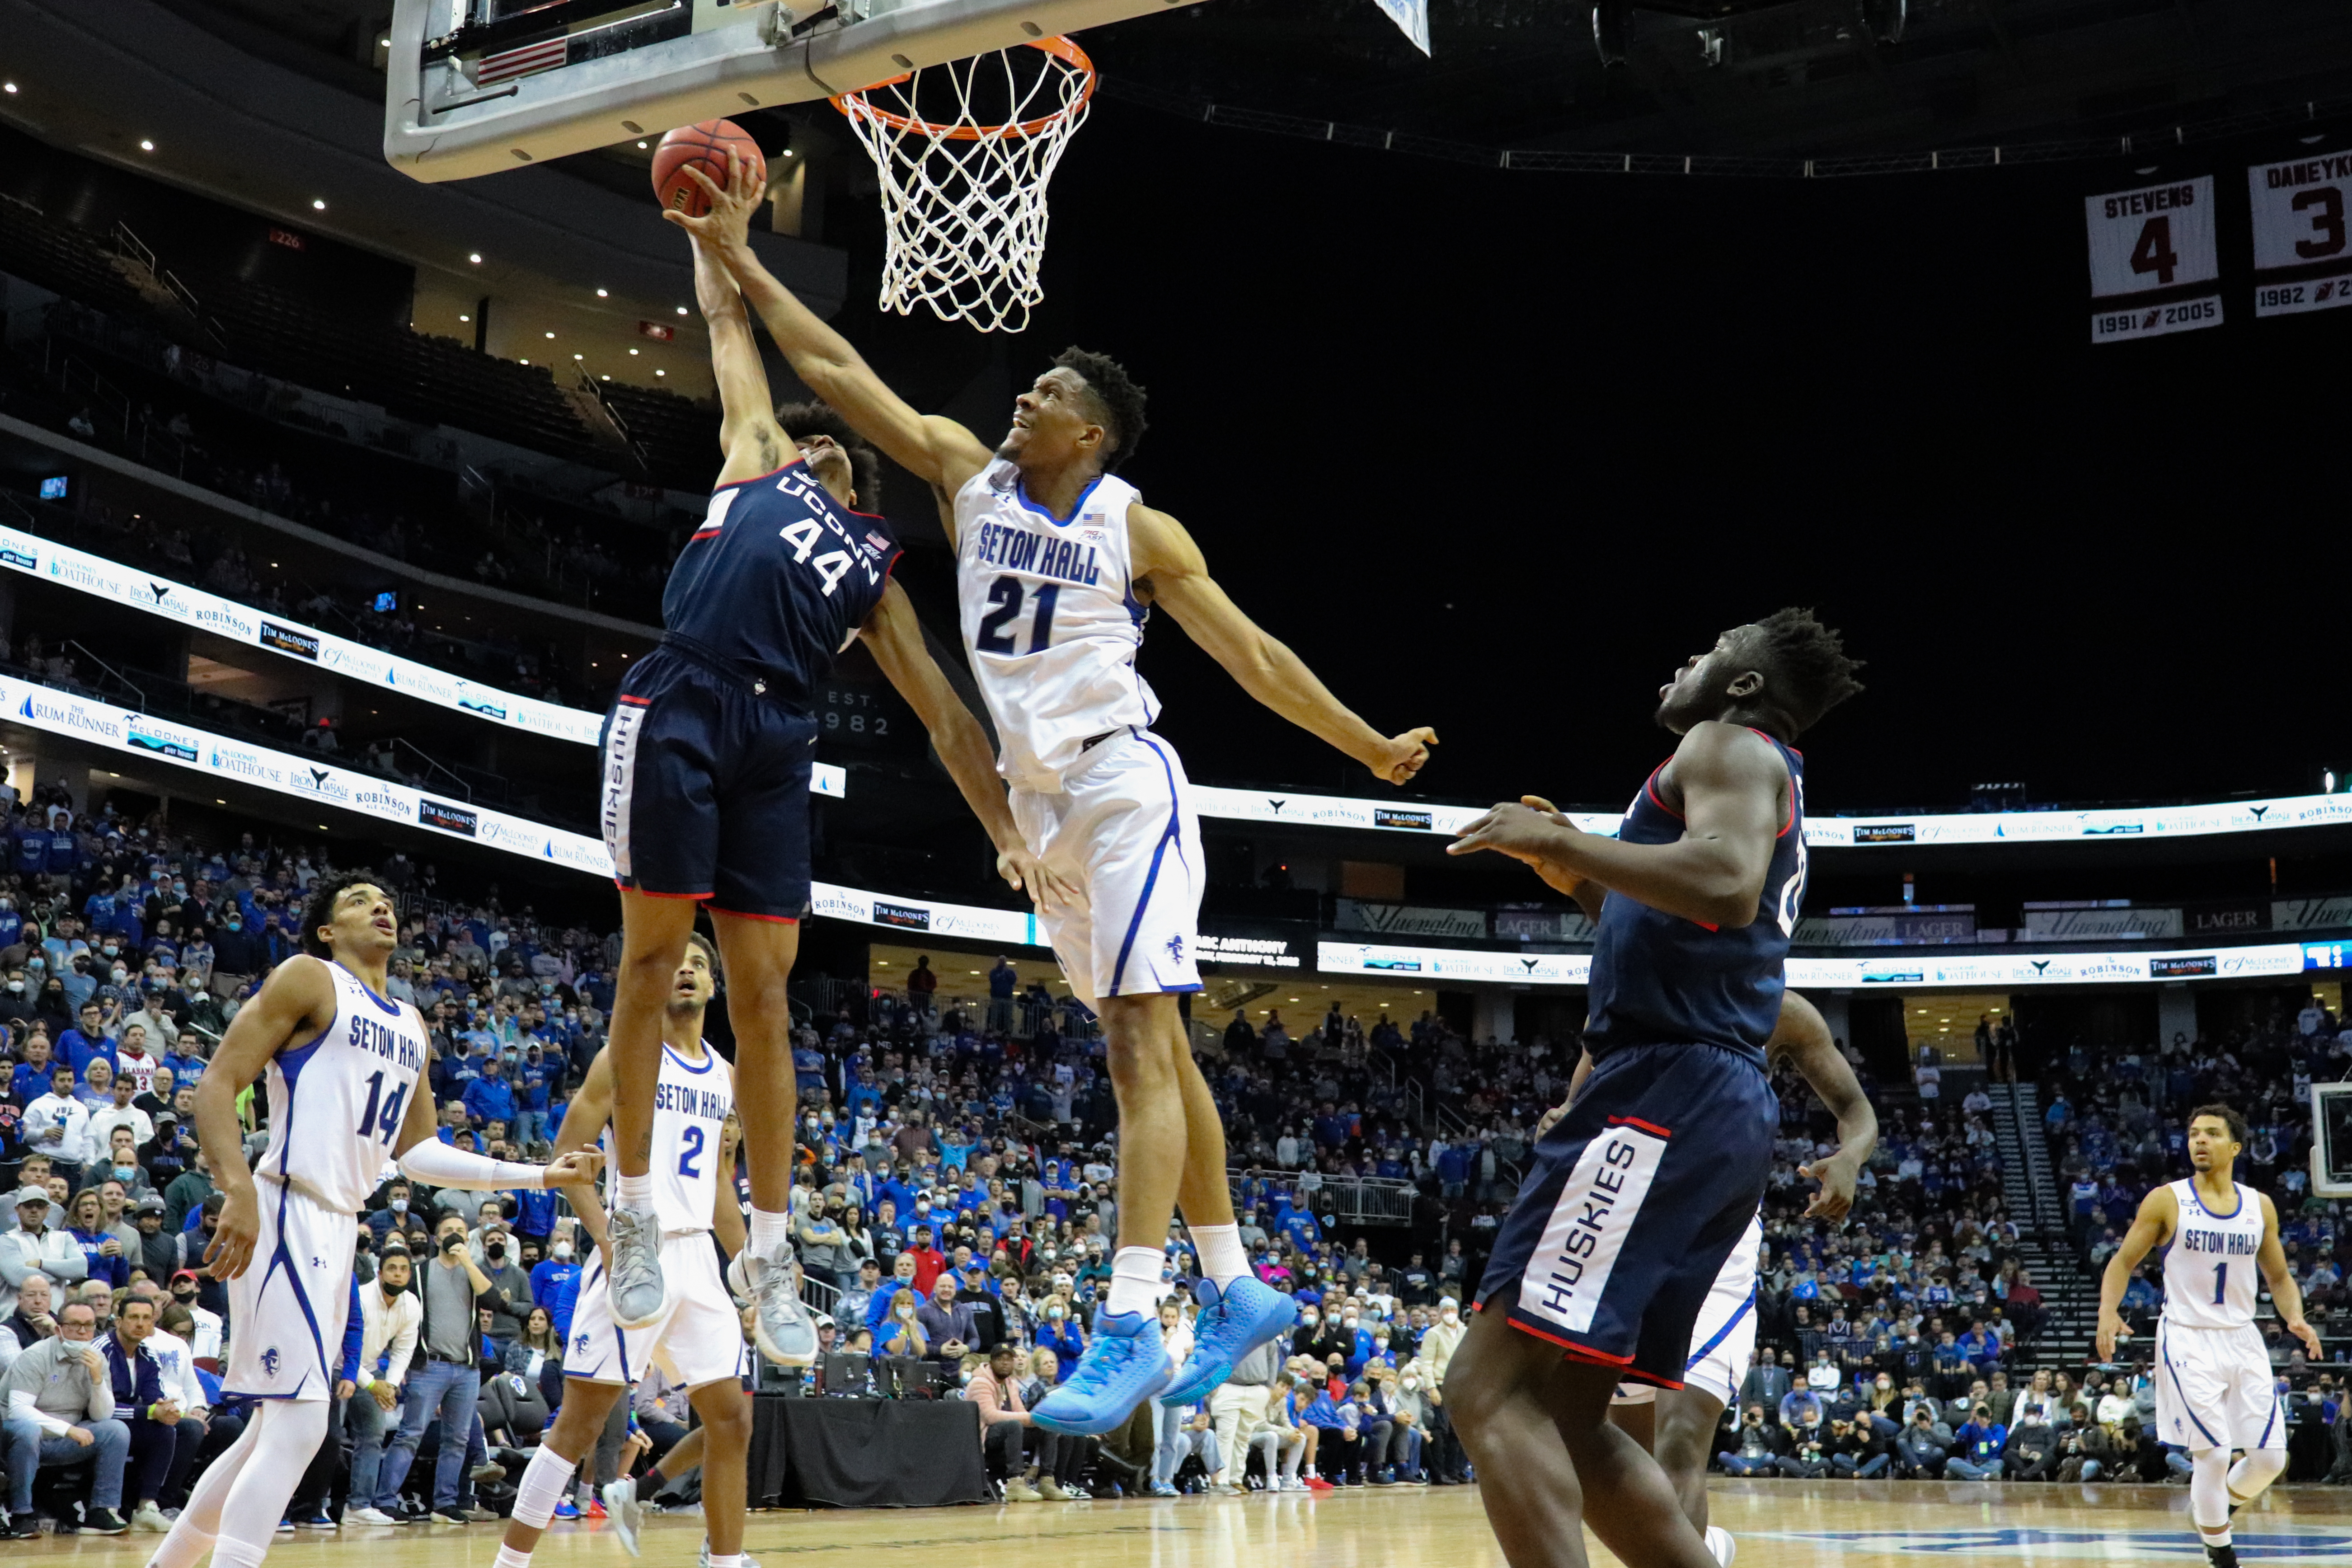 Seton Hall men's basketball's Ike Obiagu blocks a player from UConn during a home game.